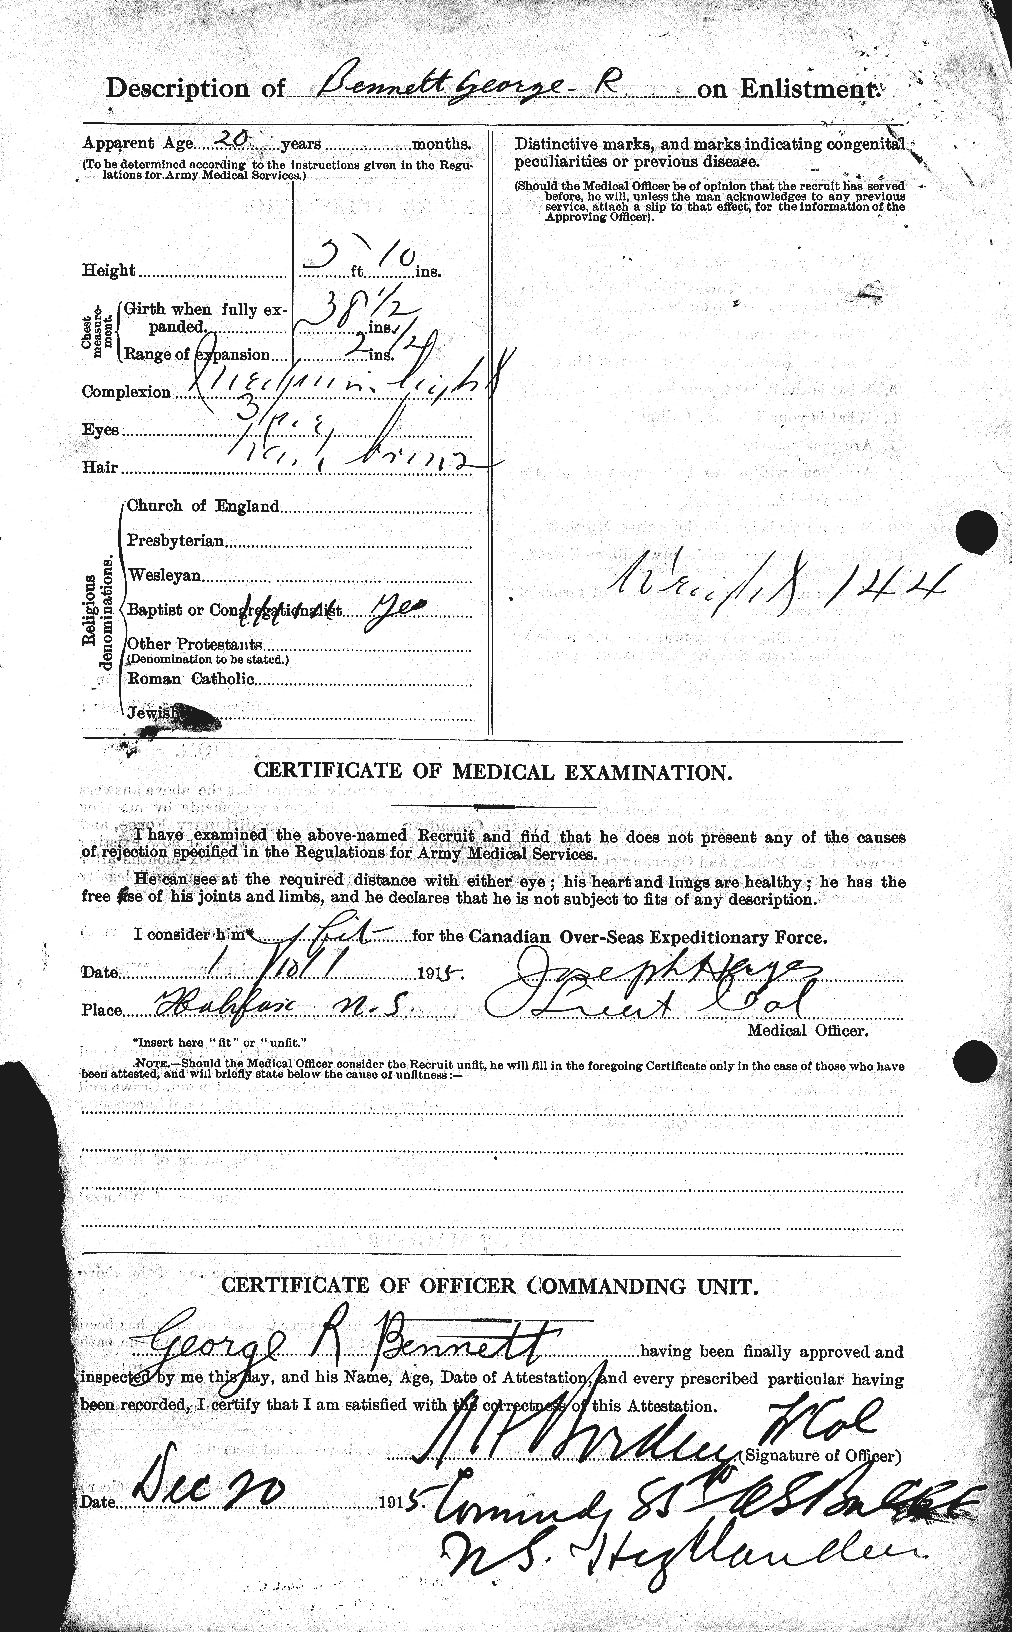 Personnel Records of the First World War - CEF 238419b